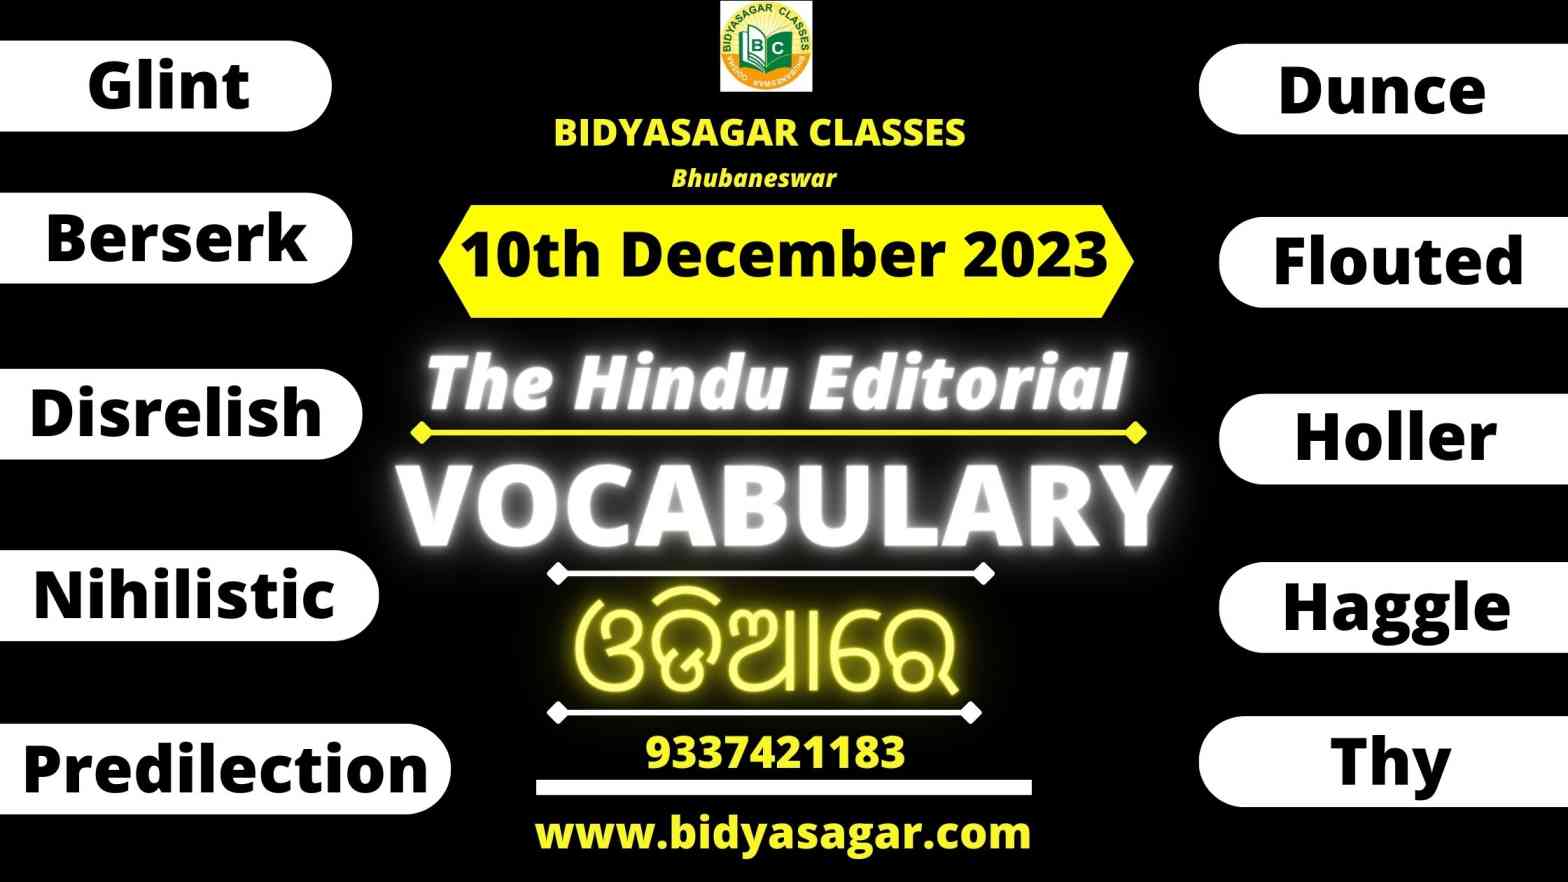 The Hindu Editorial Vocabulary of 10th December 2023